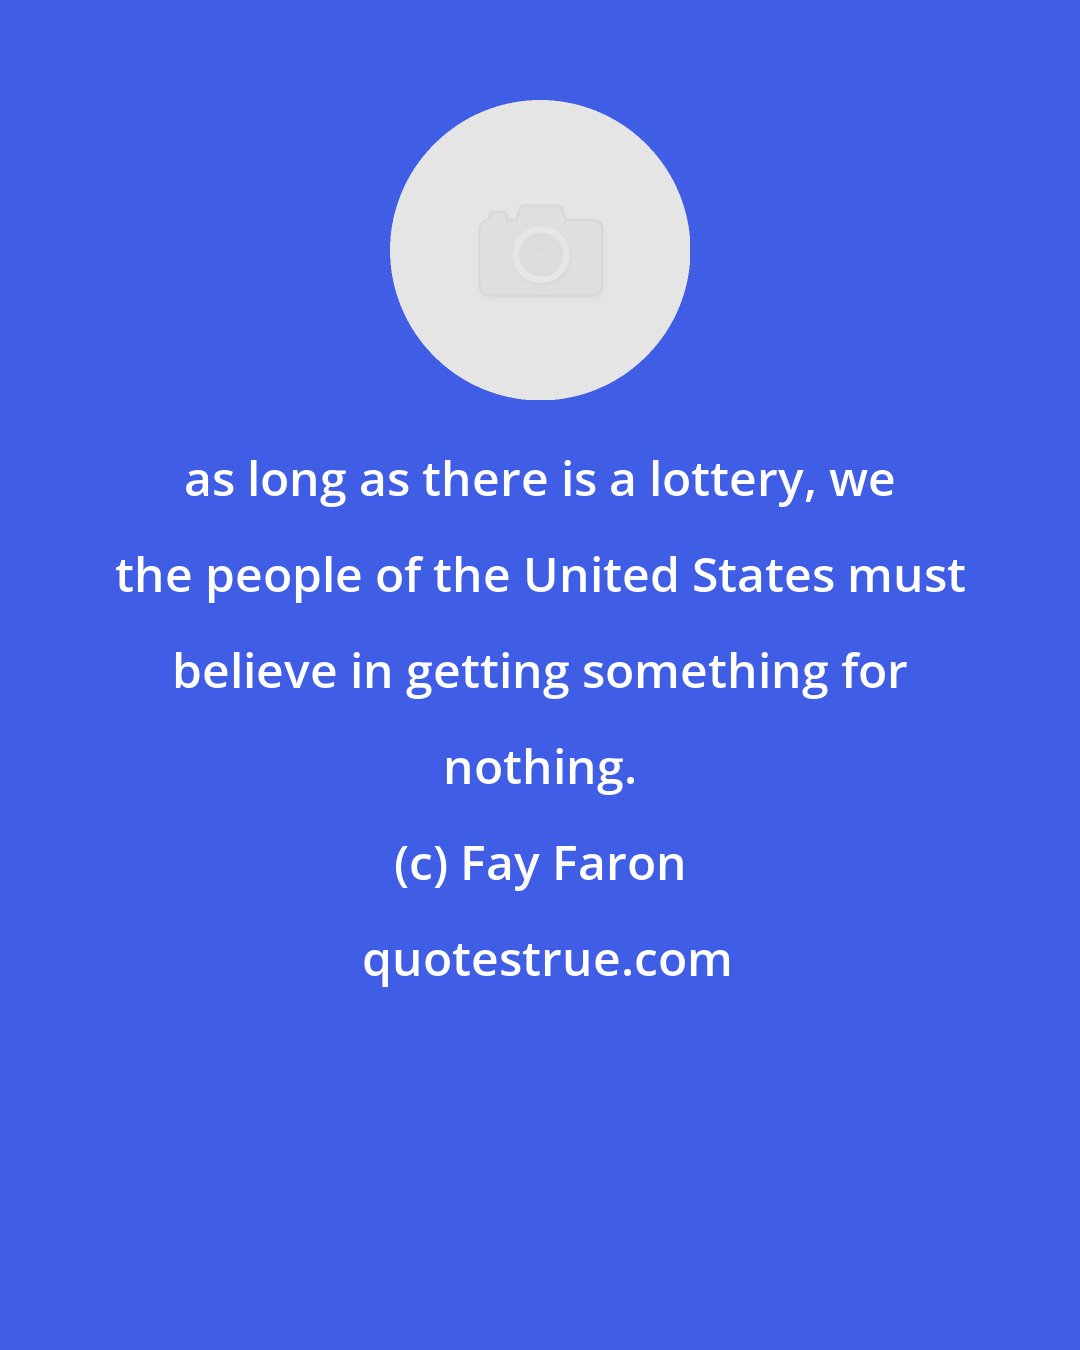 Fay Faron: as long as there is a lottery, we the people of the United States must believe in getting something for nothing.